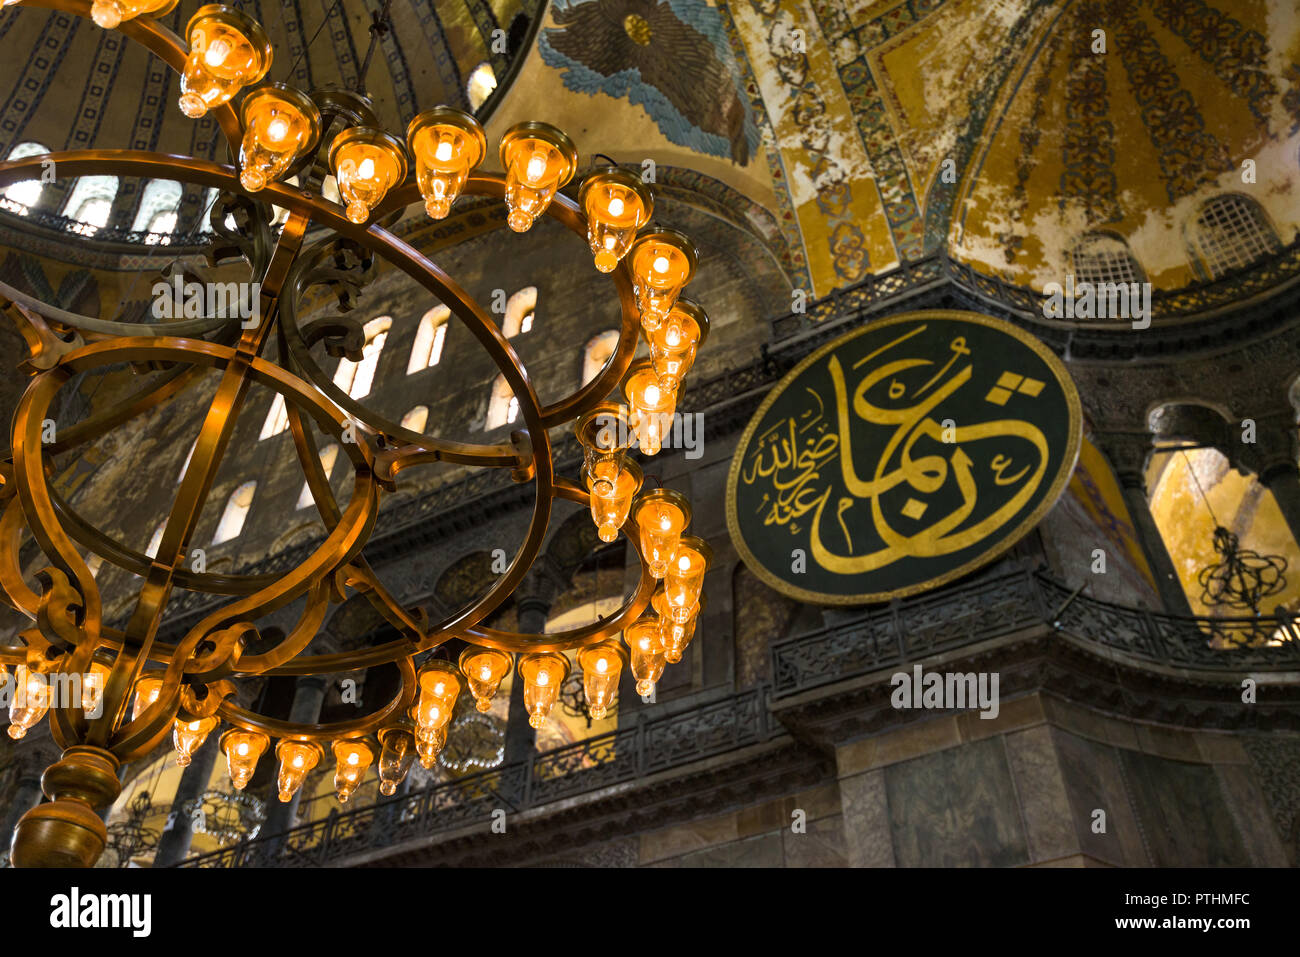 View of on of the chandaliers that light up the main nave interior of the Hagia Sophia museum with dome and calligraphic roundel in background, Istanb Stock Photo